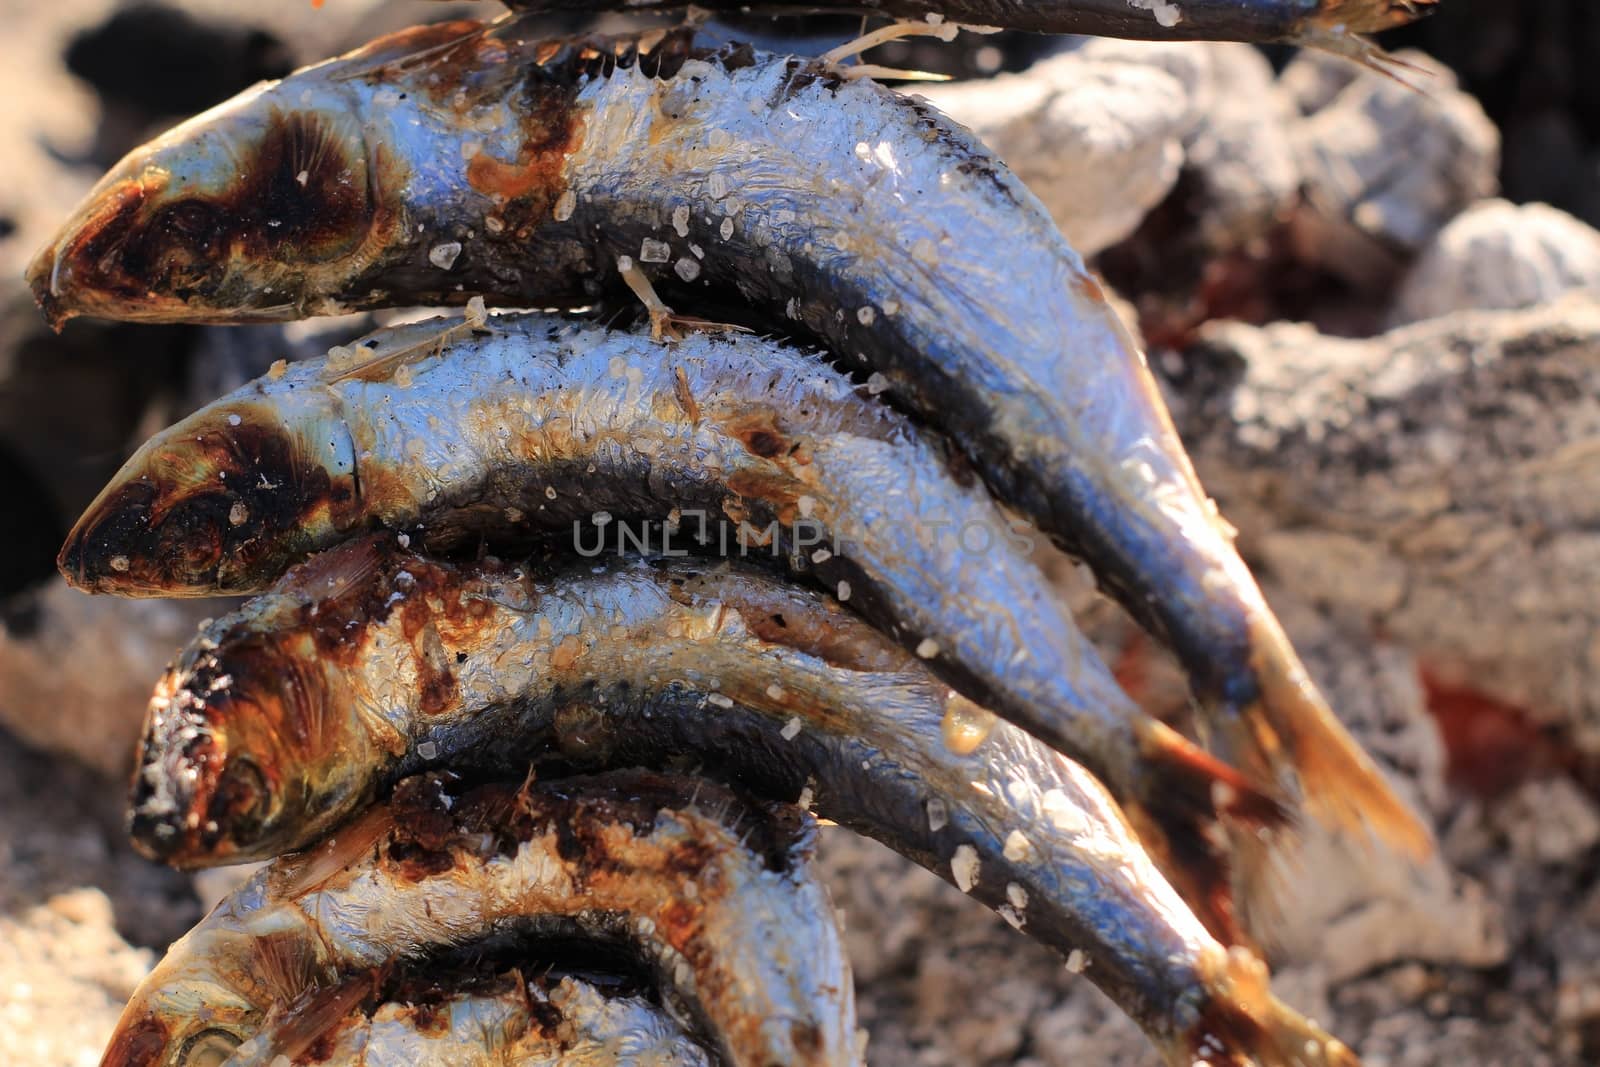 Roasted sardines on a spit in southern Spain by soniabonet